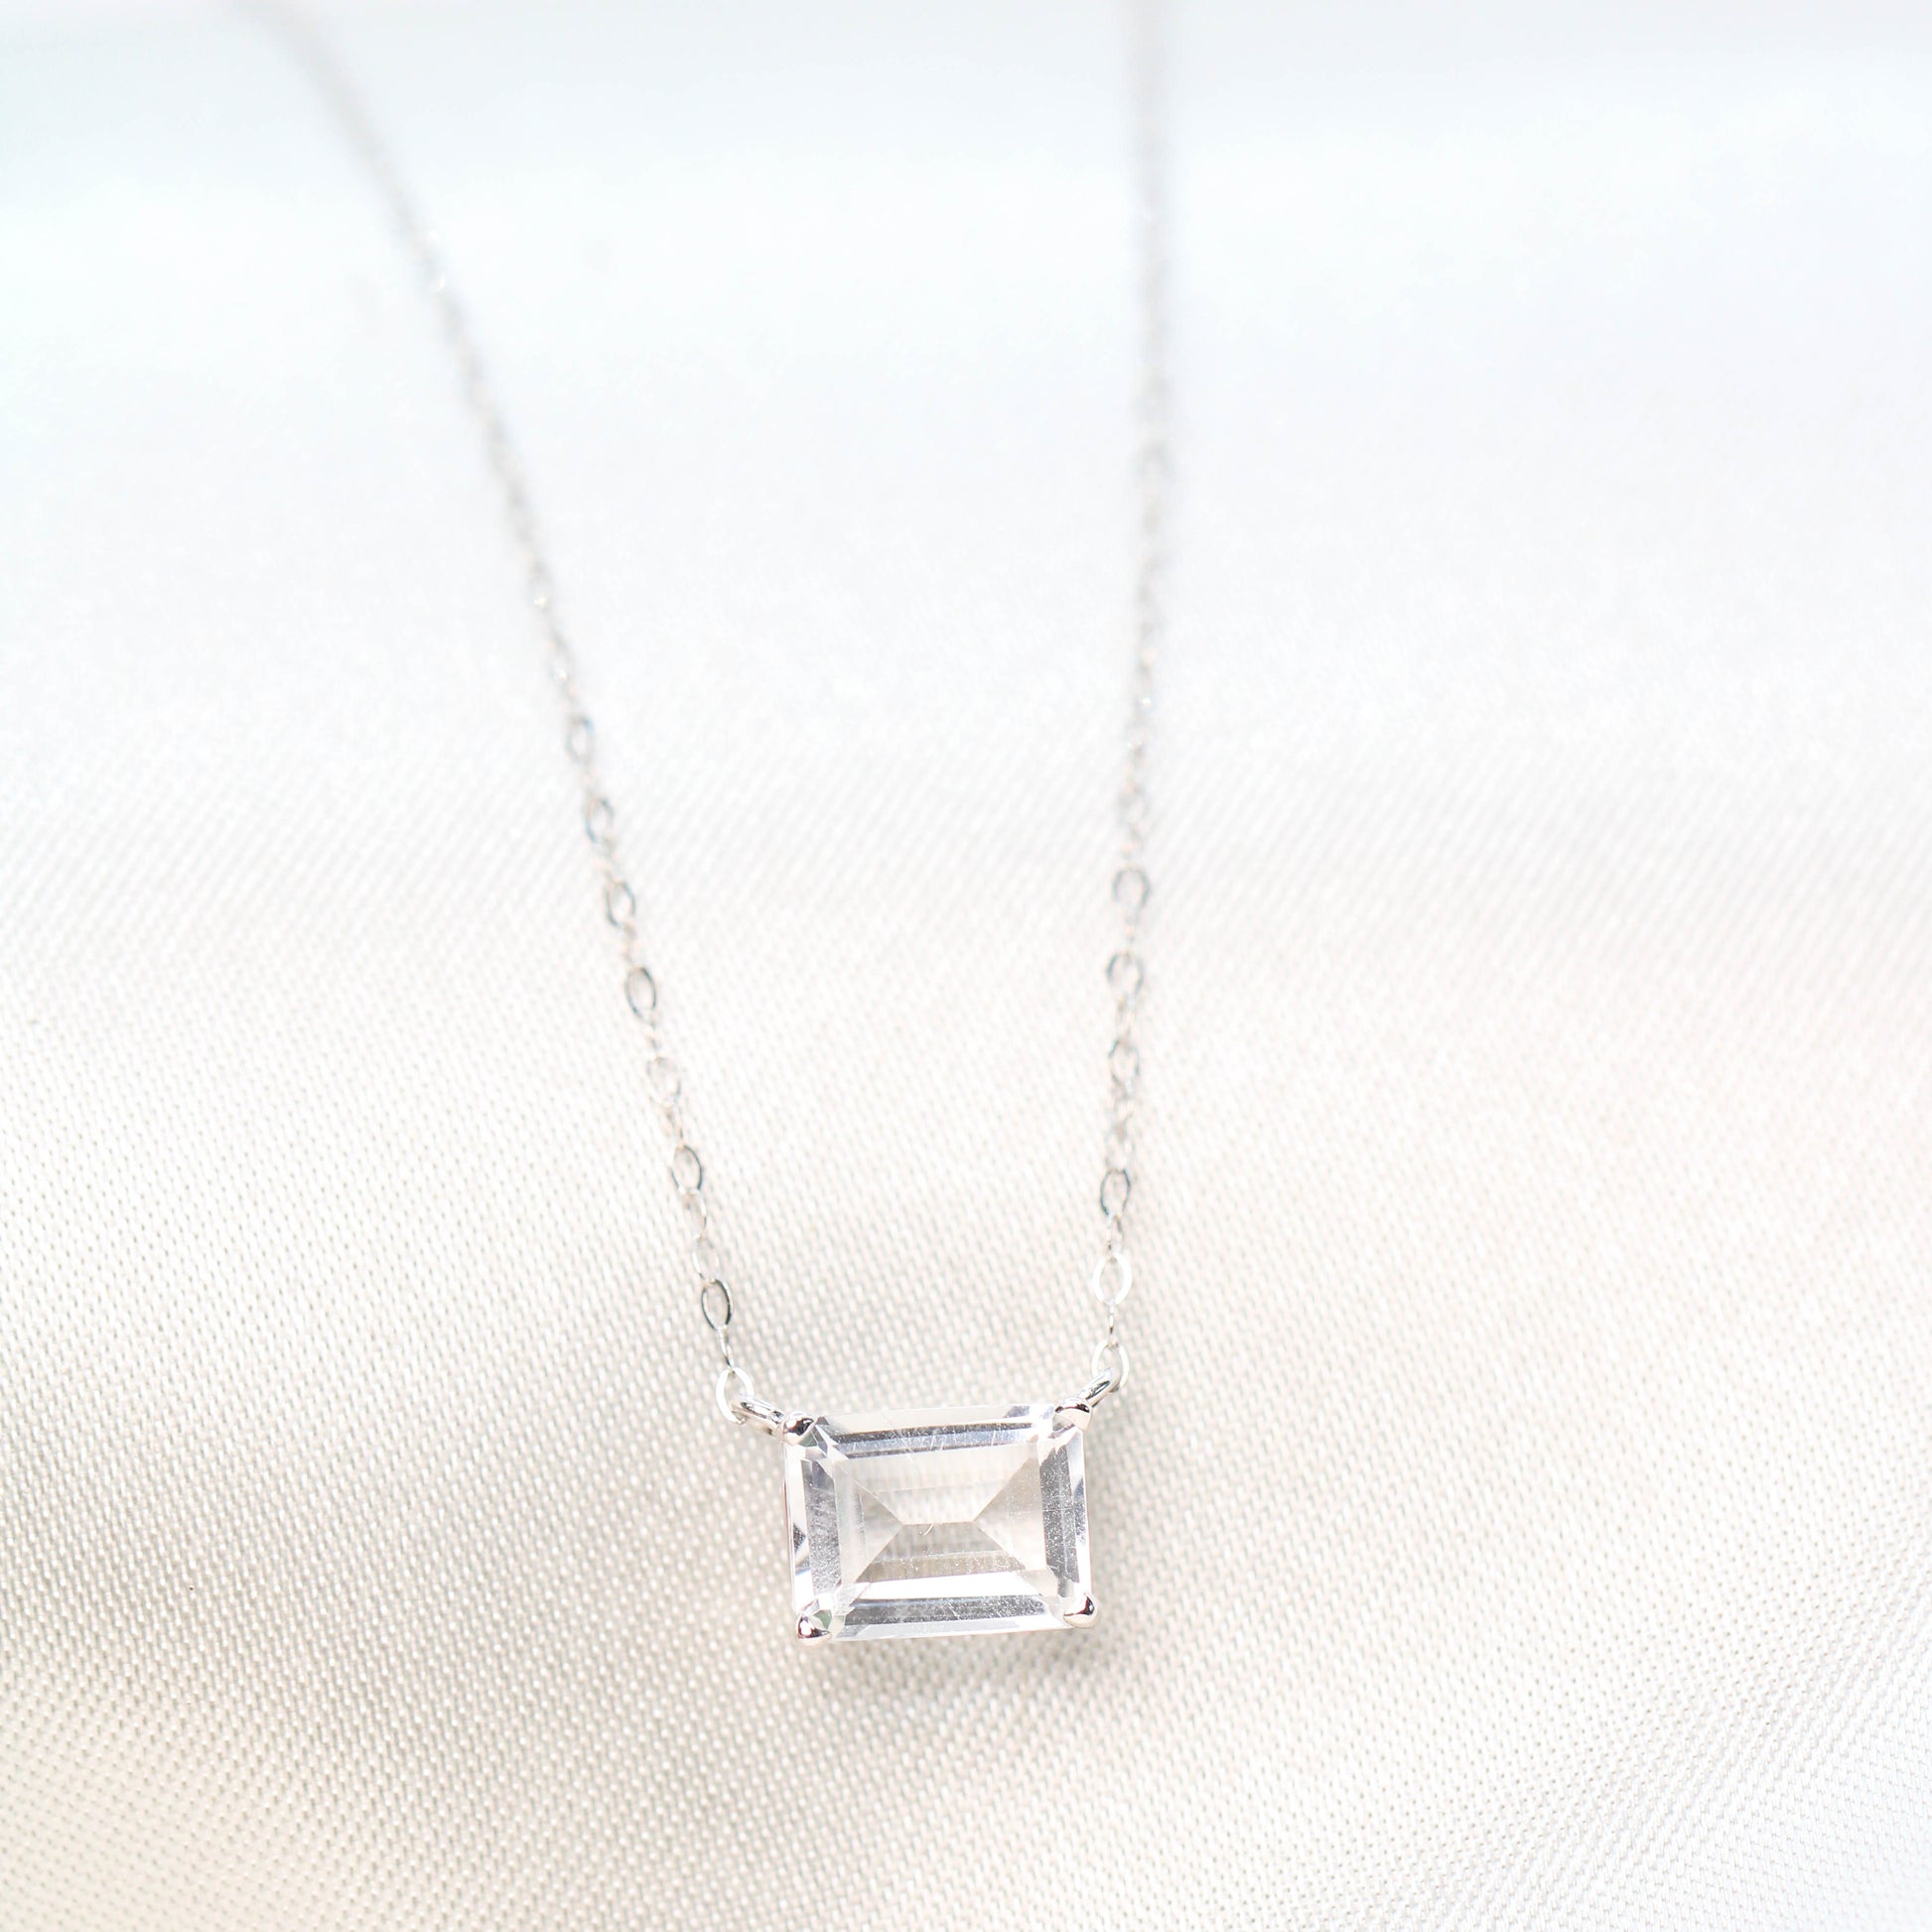 Emerald Cut Clear White Topaz Pendant Necklace - Made to Order - Midwinter Co. Alternative Bridal Rings and Modern Fine Jewelry